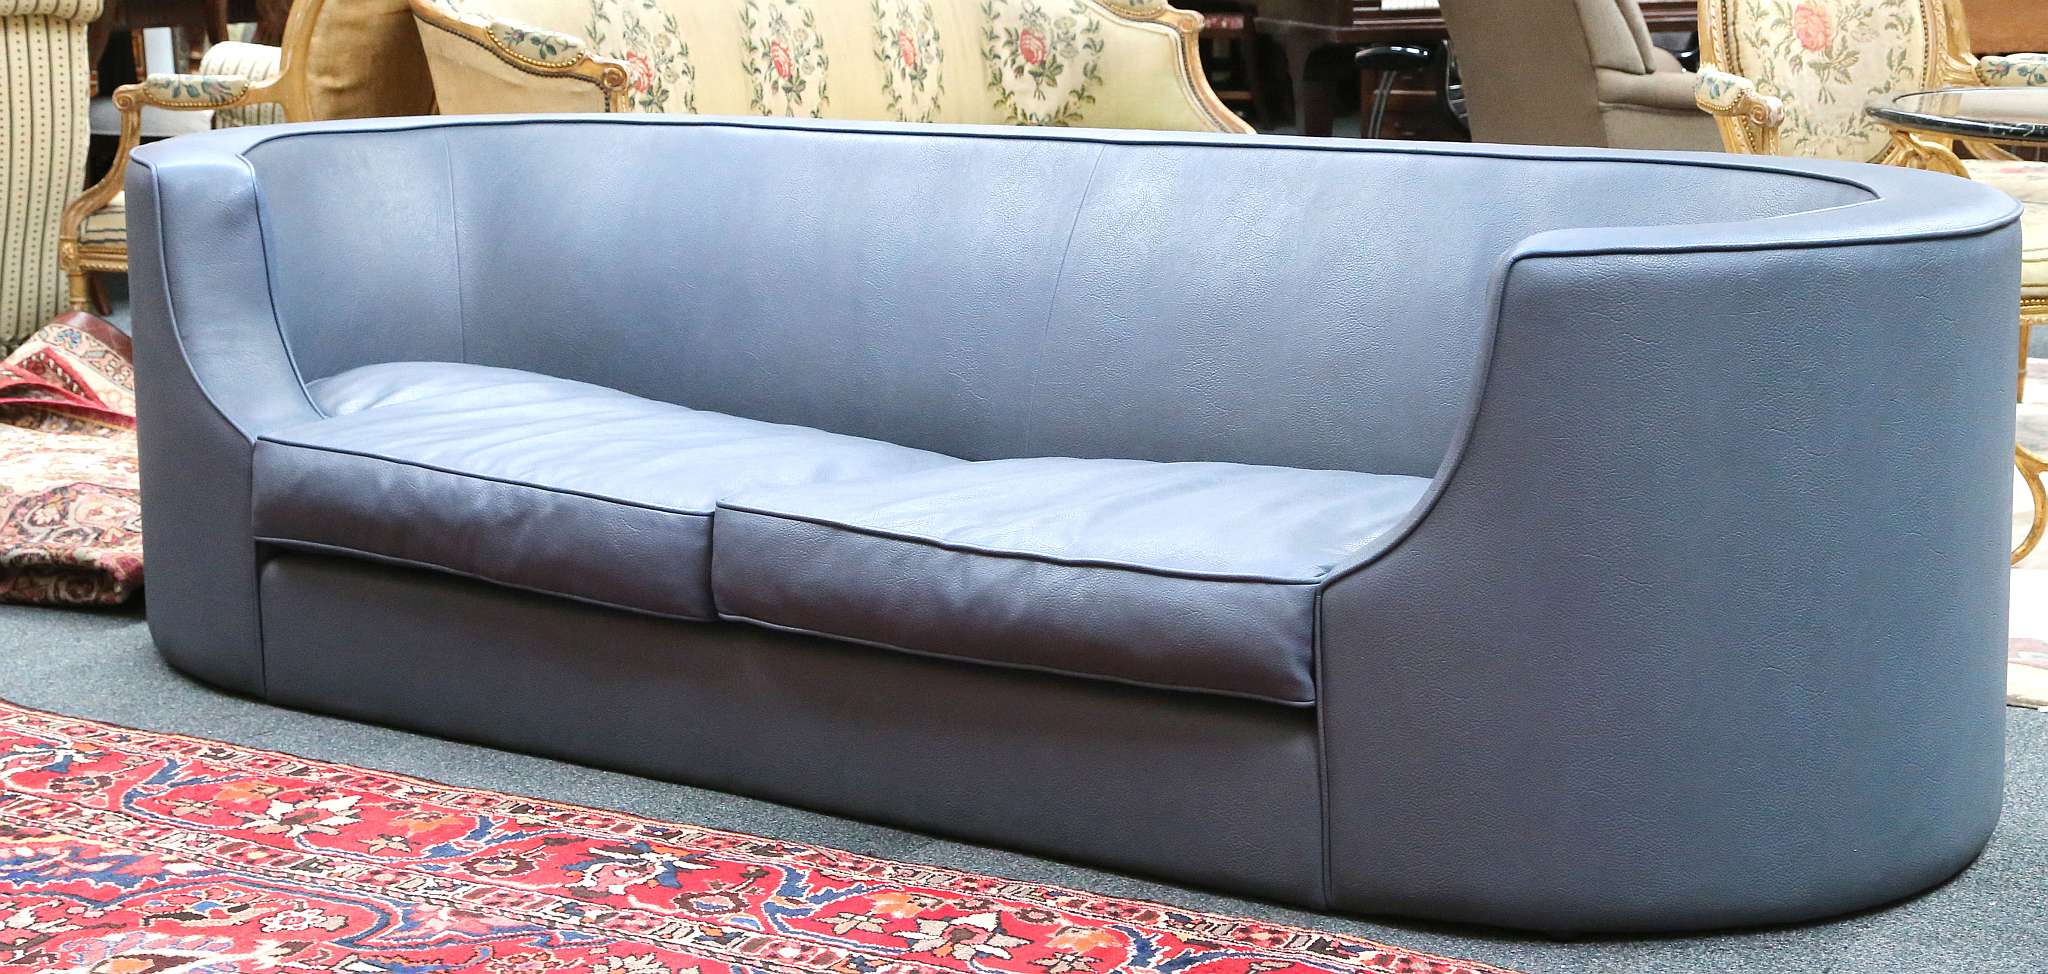 A Heals blue leather upholstered sofa with C end arm rests, 147cm w x 100cm d x 67cm h